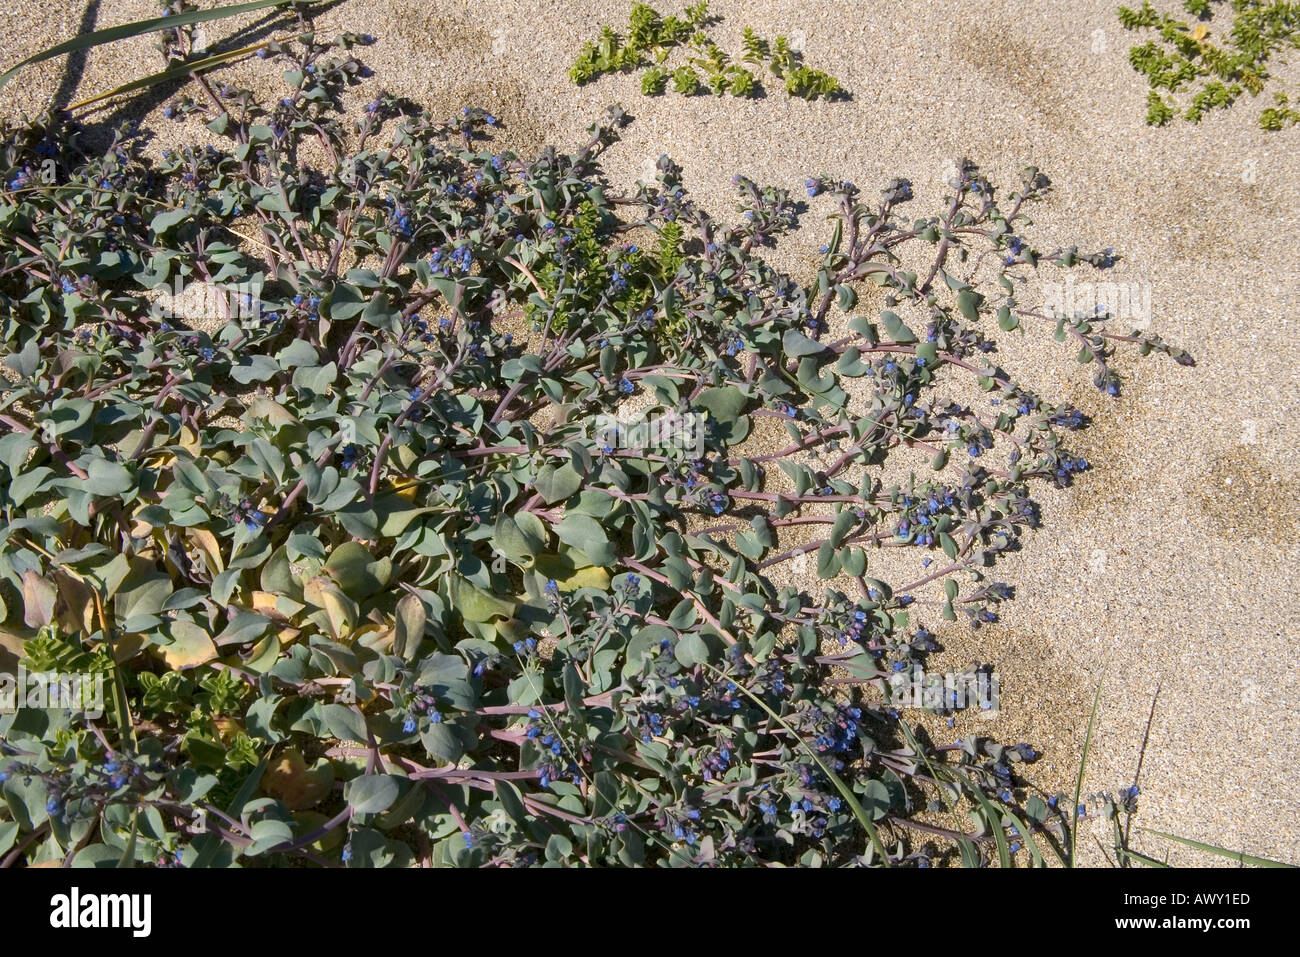 dh Oysterplant FORGET ME NOT UK Blue flowering sand creeping plant on beach Orkney wild flowers scotland Stock Photo